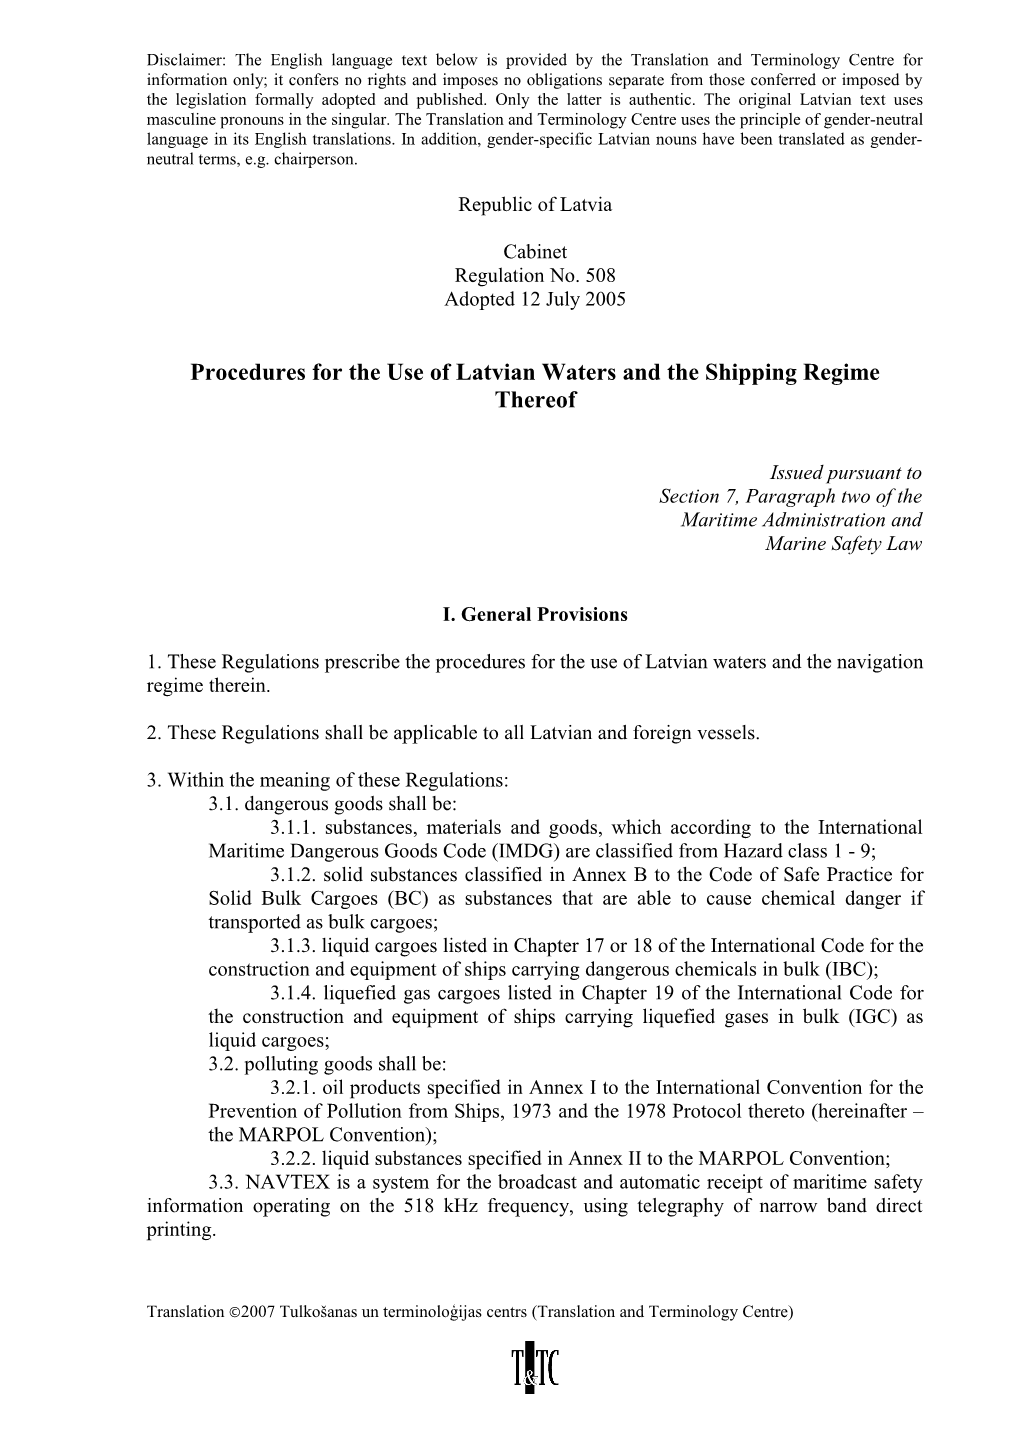 Procedures for the Use of Latvian Waters and the Shipping Regime Thereof